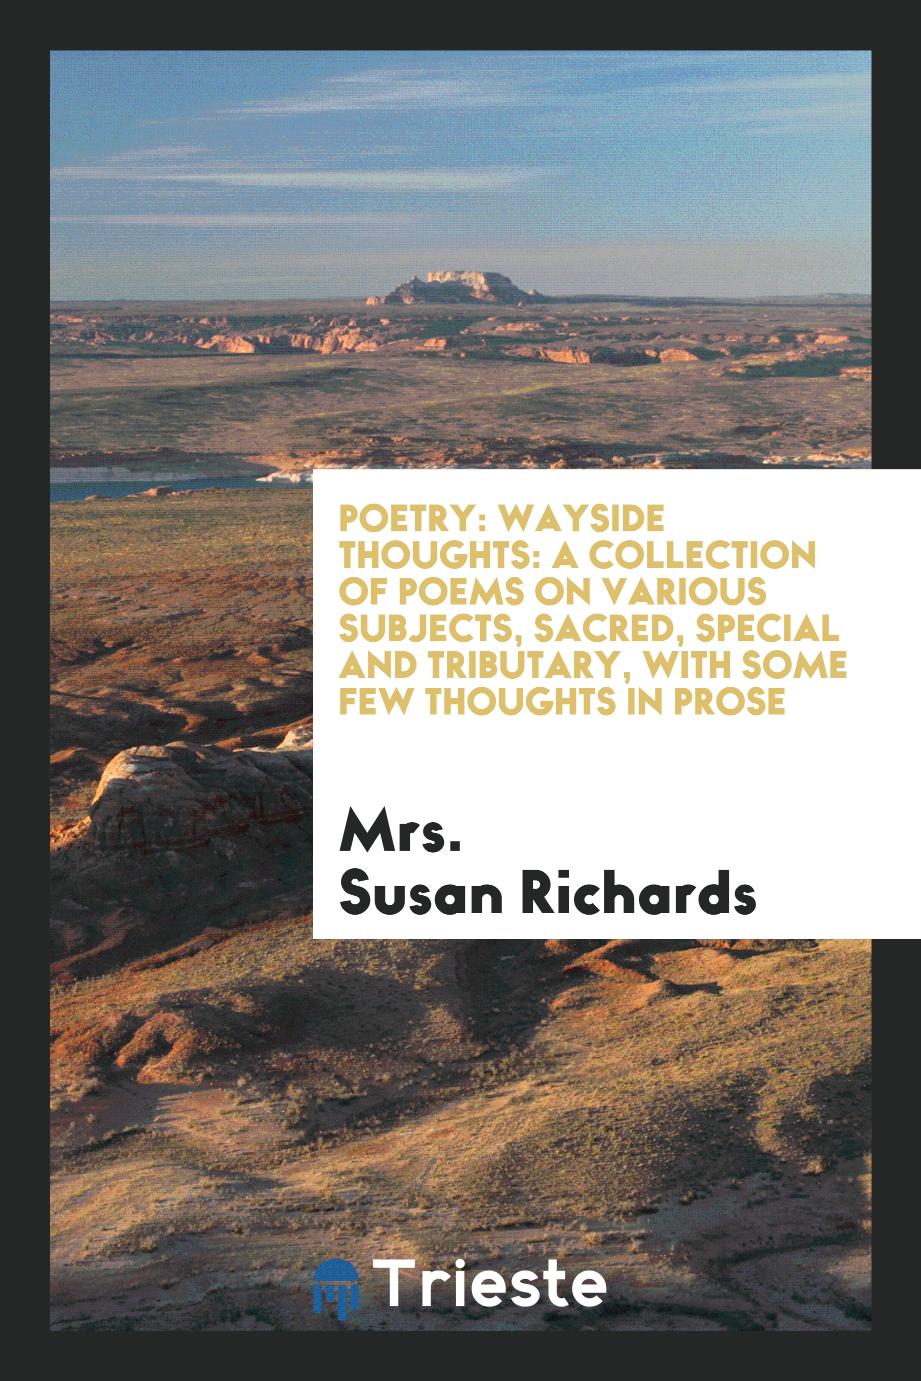 Poetry: wayside thoughts: a collection of poems on various subjects, sacred, special and tributary, with some few thoughts in prose